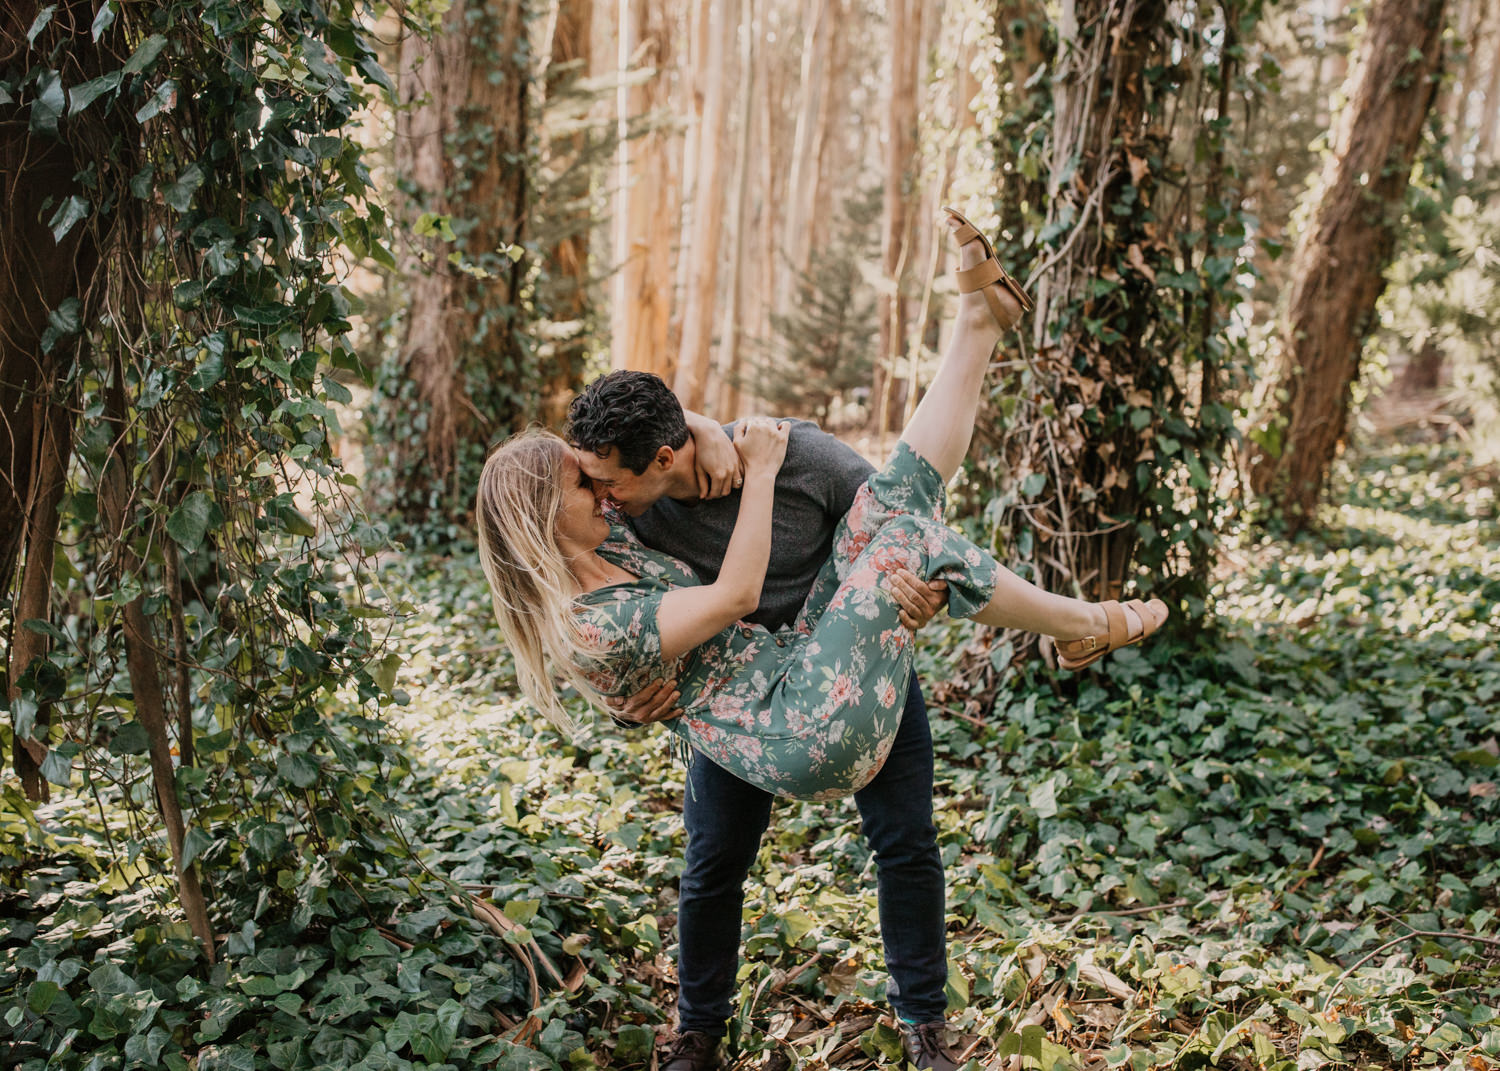 San Francisco Lovers Lane Engagement Session couples posing inspo engagement session outfit Inspo free spirit engagement photos wild and free engagement session bay area bride kiss and dip engagement pose Rachel christopherson Photography